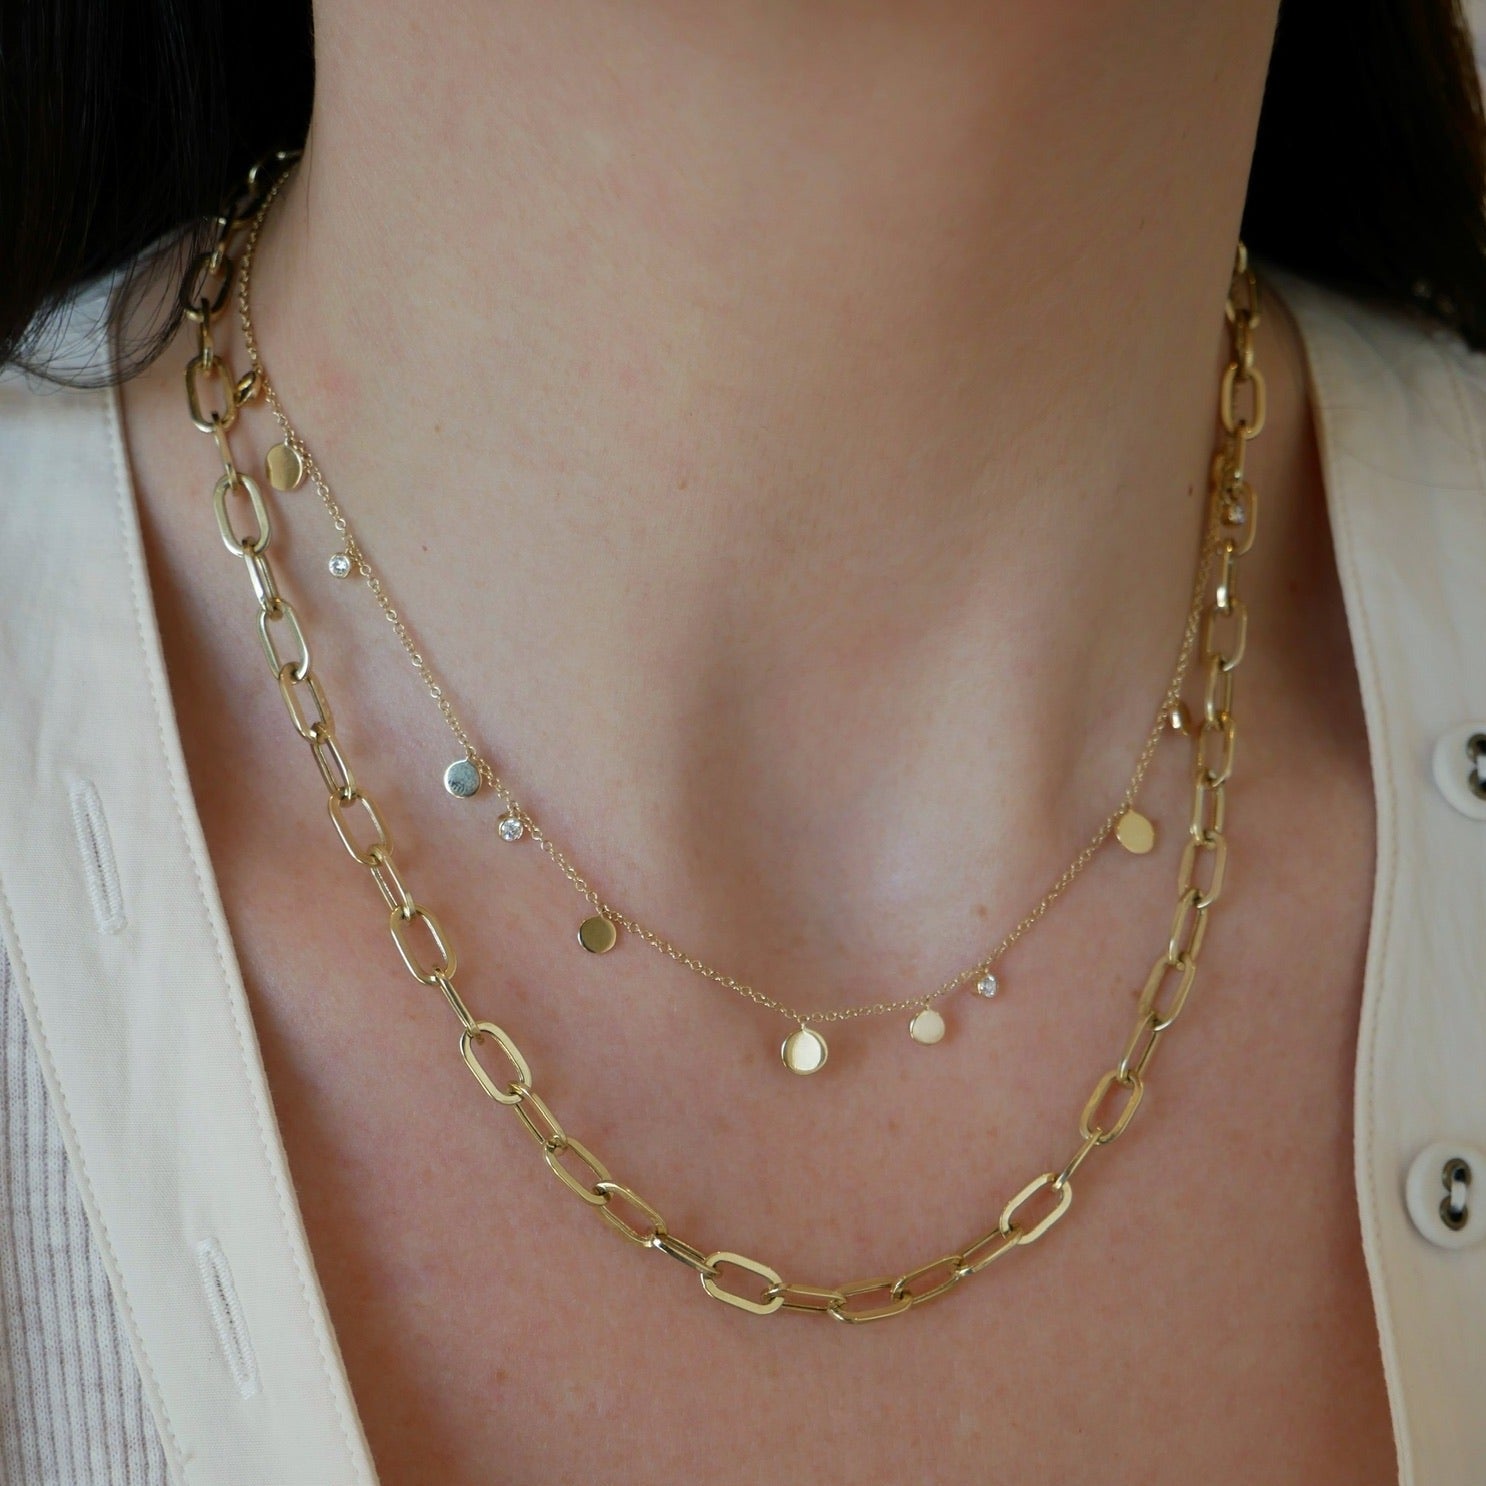 Gold & Diamond Confetti Necklace in yellow gold on the neck